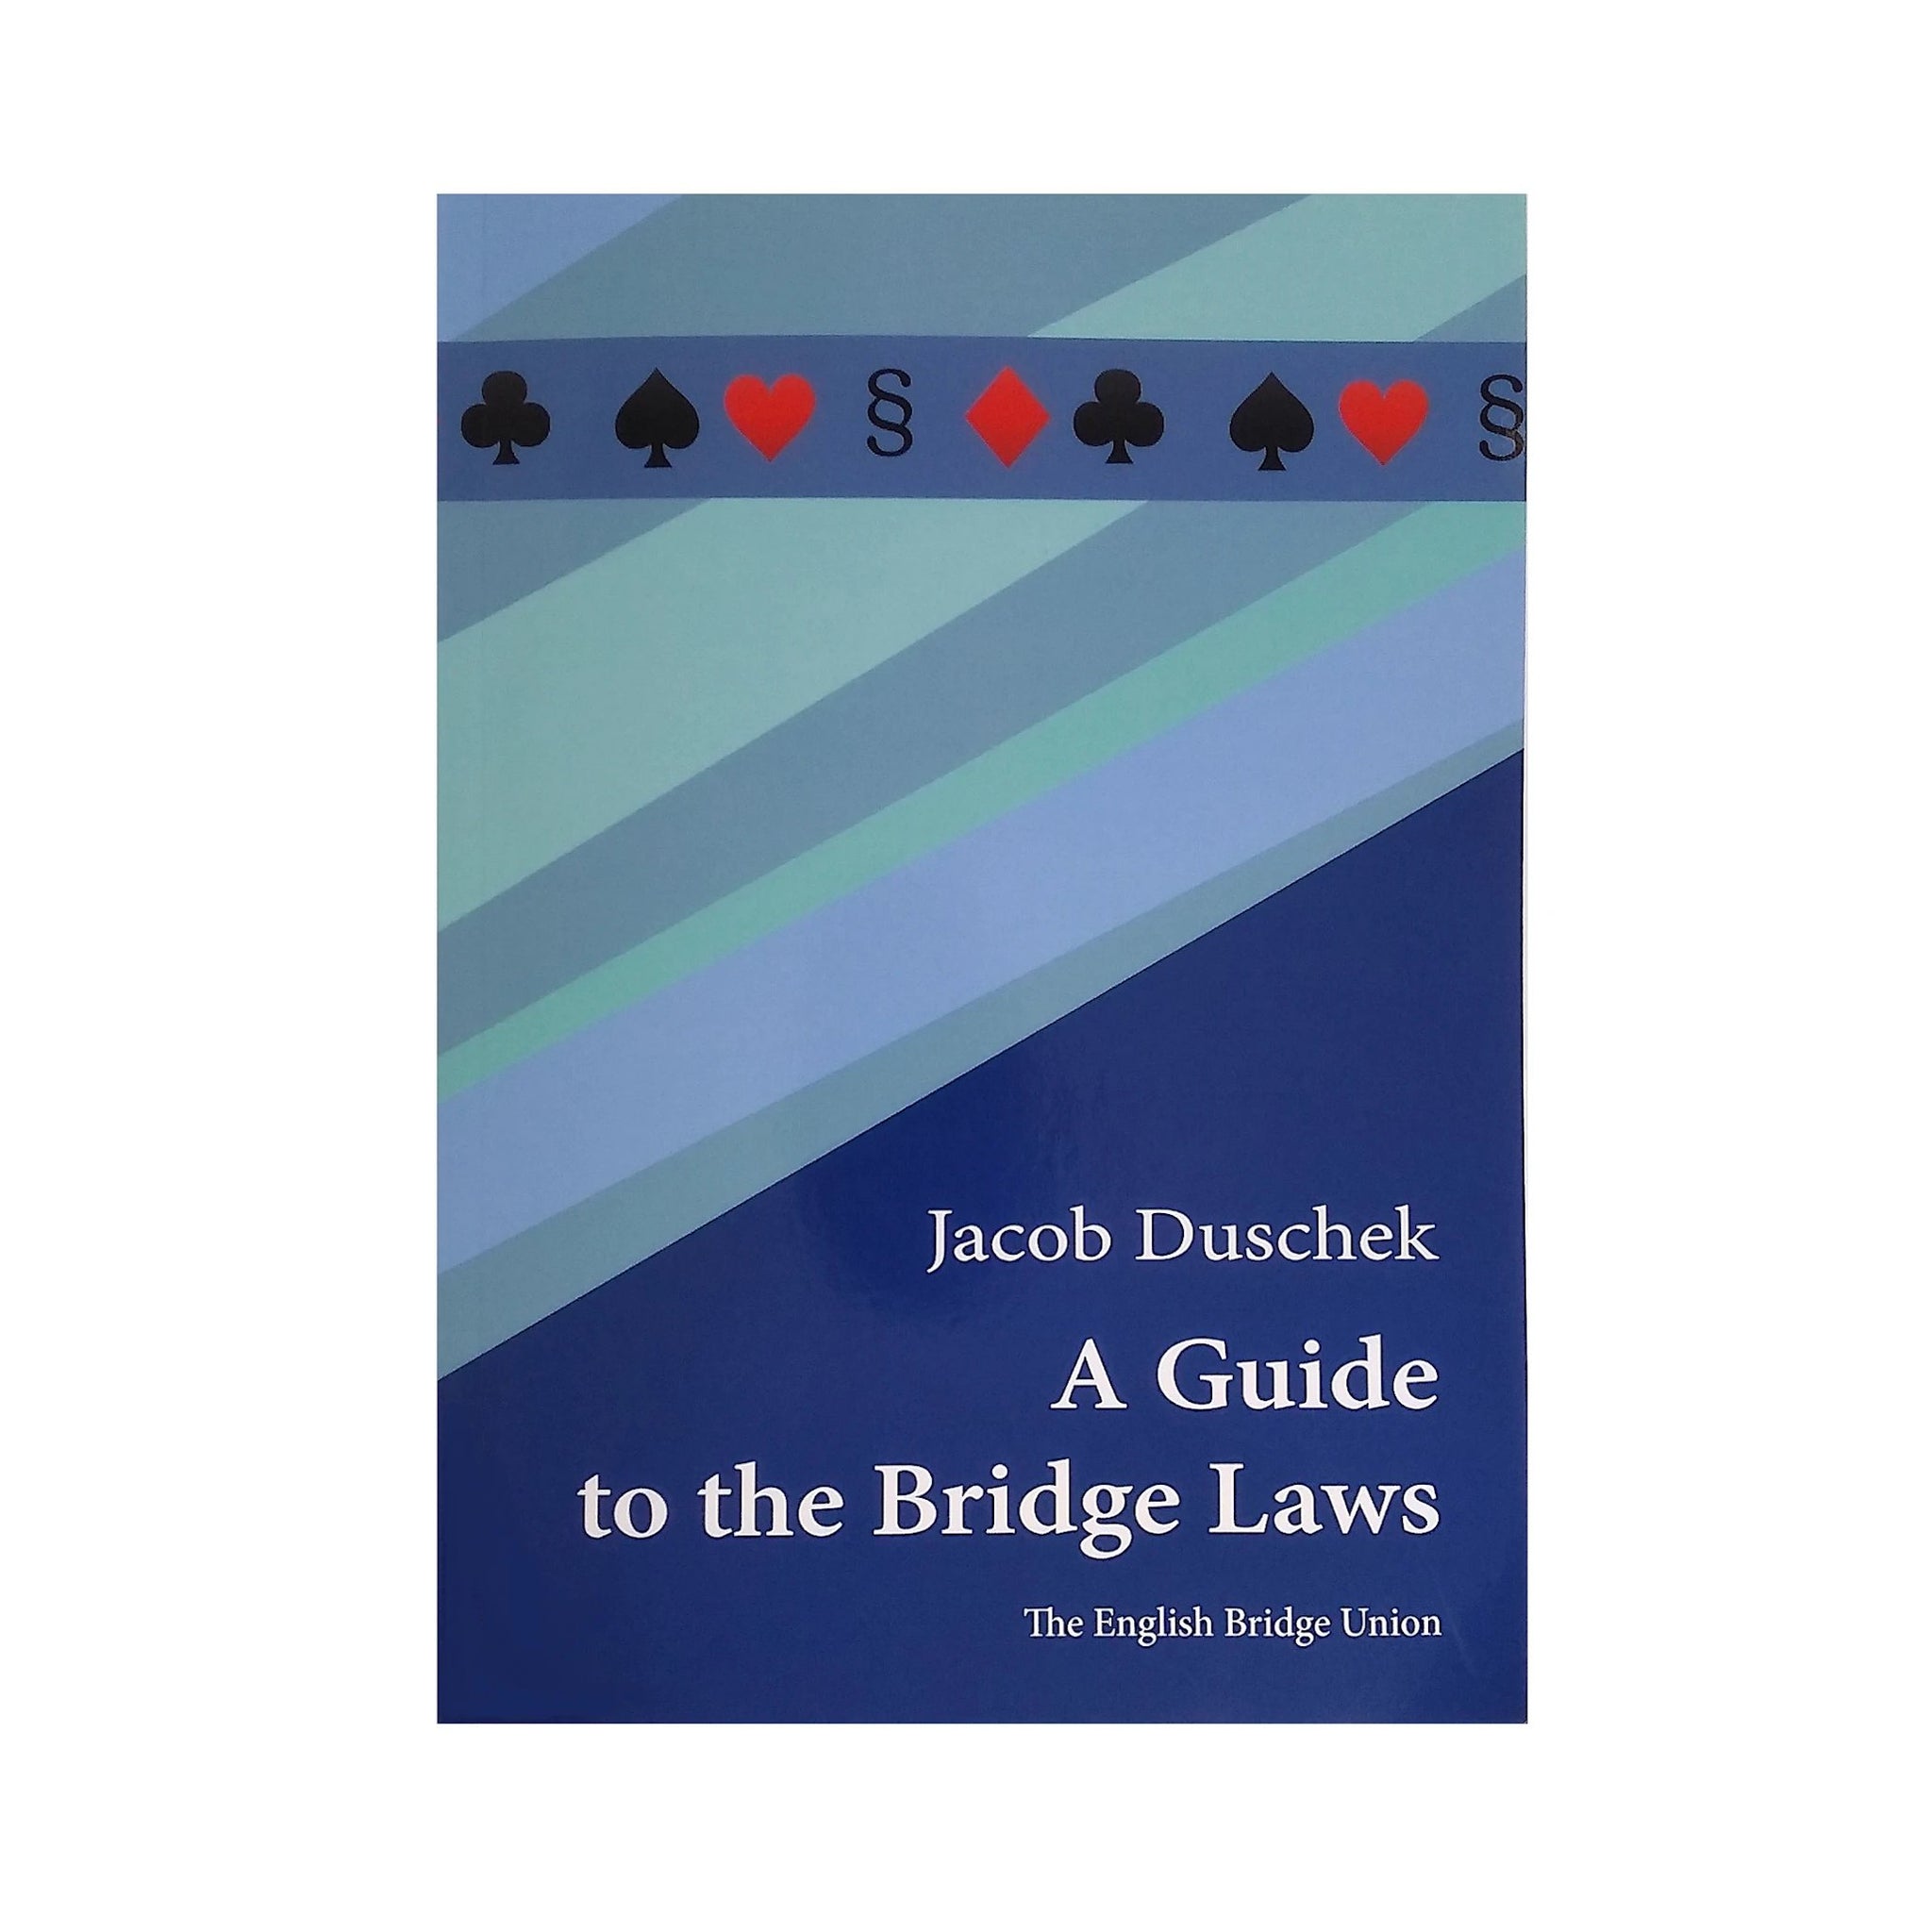 A Guide to the Bridge Laws